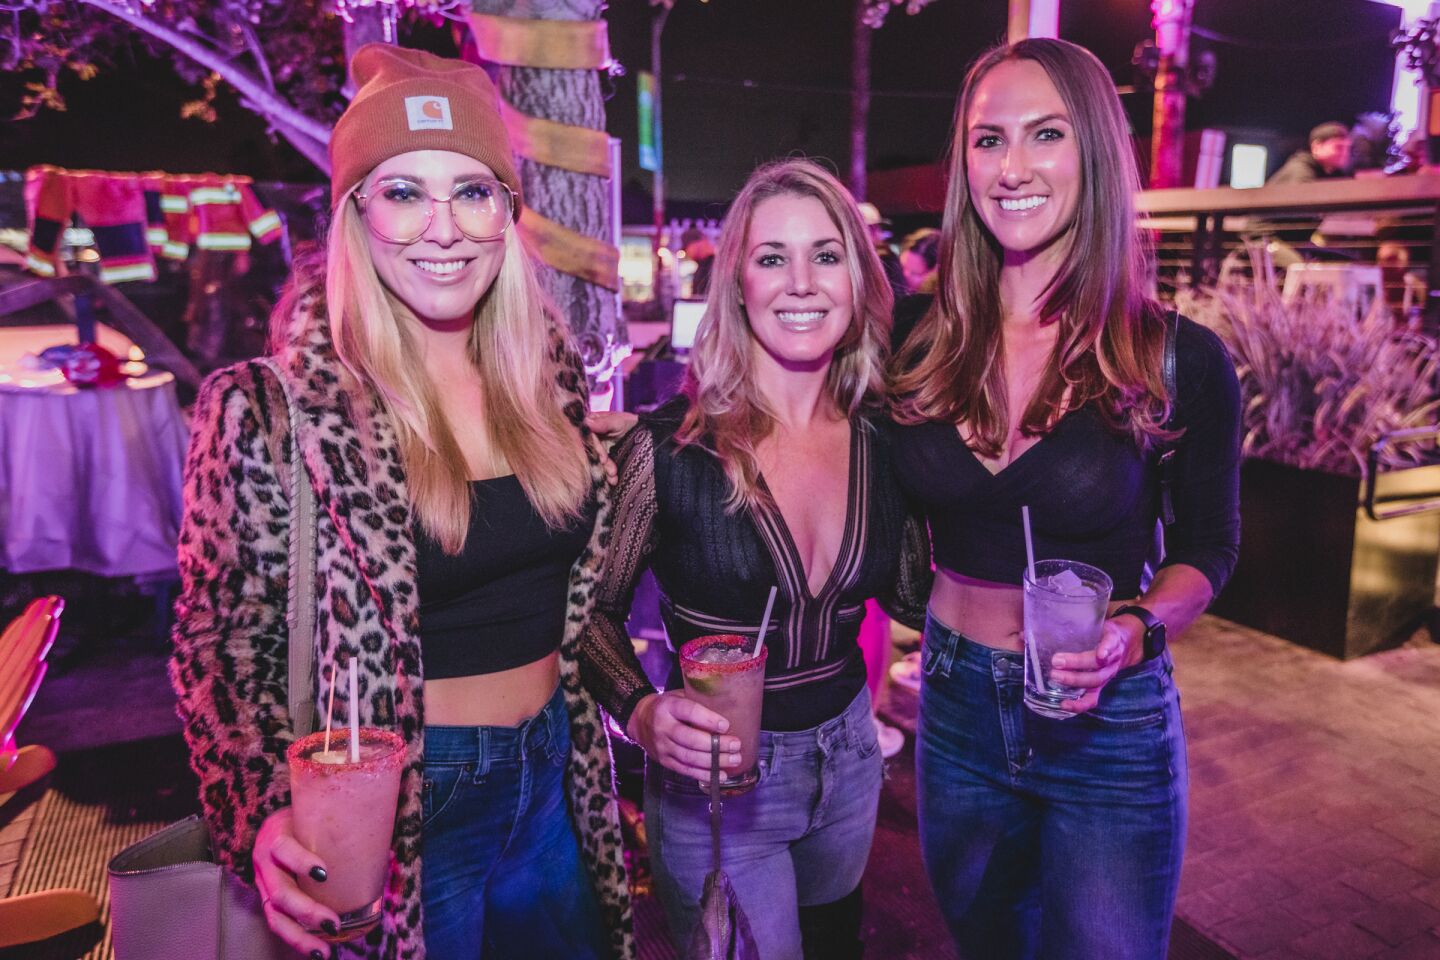 Mustaches were all the rage at the San Diego Fire Department Mustache Bash benefitting FirefighterAid at Mavericks Beach Club in Pacific Beach on Thursday, Nov. 4, 2021.